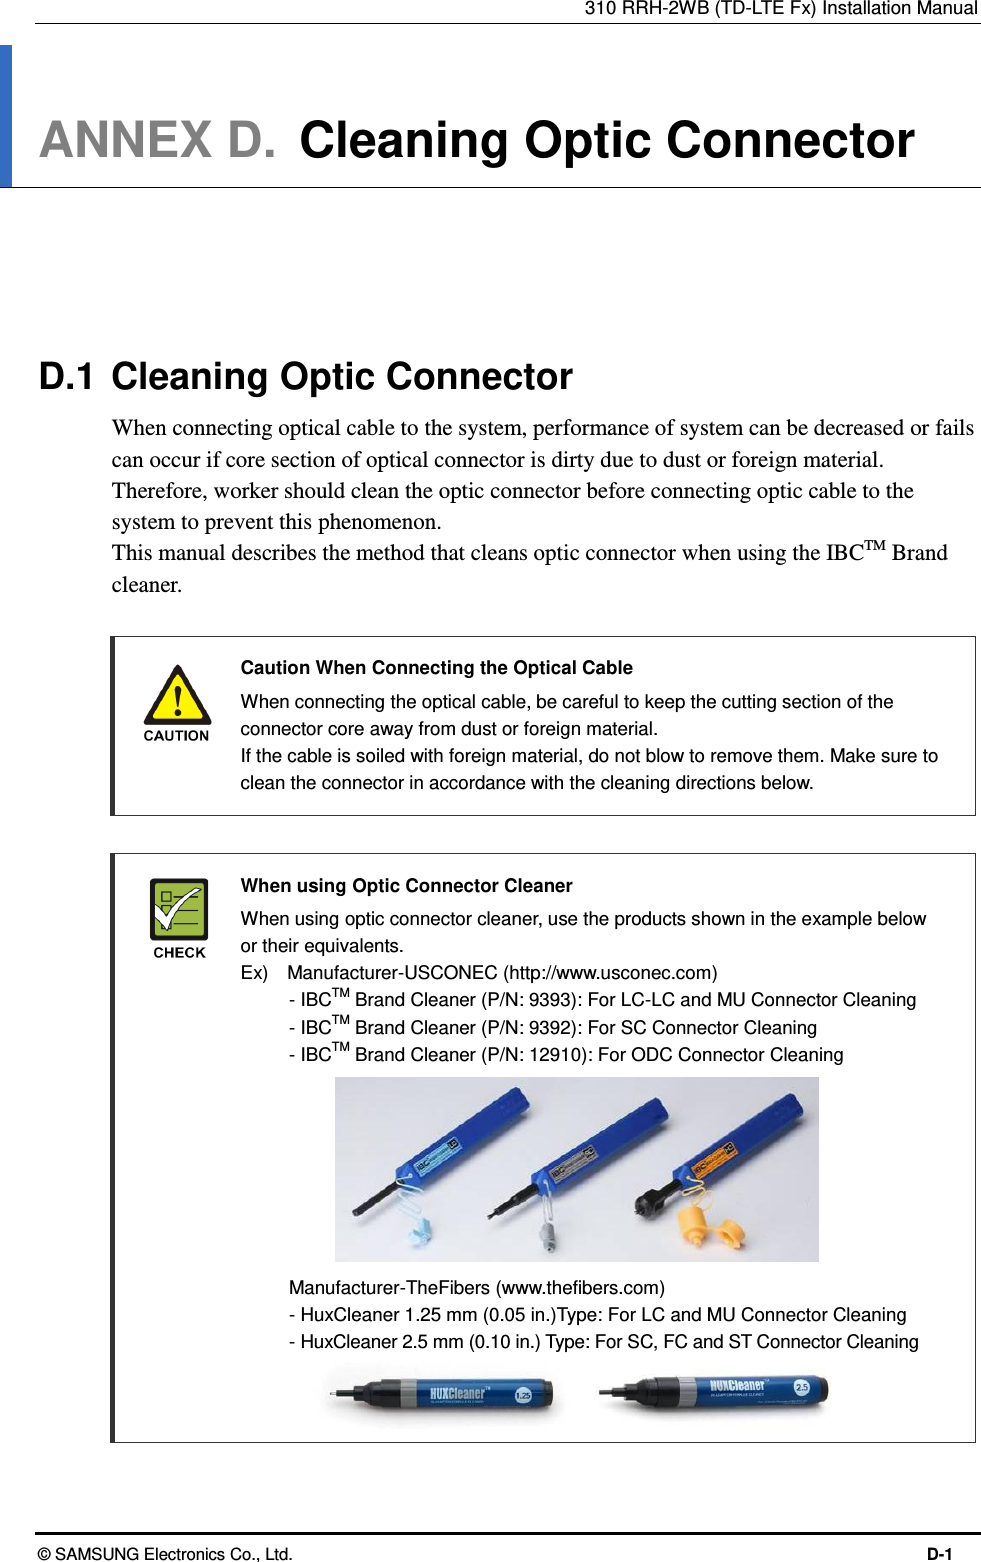 310 RRH-2WB (TD-LTE Fx) Installation Manual © SAMSUNG Electronics Co., Ltd.  D-1 ANNEX D.  Cleaning Optic Connector      D.1 Cleaning Optic Connector When connecting optical cable to the system, performance of system can be decreased or fails can occur if core section of optical connector is dirty due to dust or foreign material. Therefore, worker should clean the optic connector before connecting optic cable to the system to prevent this phenomenon. This manual describes the method that cleans optic connector when using the IBCTM Brand cleaner.   Caution When Connecting the Optical Cable     When connecting the optical cable, be careful to keep the cutting section of the connector core away from dust or foreign material. If the cable is soiled with foreign material, do not blow to remove them. Make sure to clean the connector in accordance with the cleaning directions below.   When using Optic Connector Cleaner   When using optic connector cleaner, use the products shown in the example below or their equivalents.   Ex)    Manufacturer-USCONEC (http://www.usconec.com)     - IBCTM Brand Cleaner (P/N: 9393): For LC-LC and MU Connector Cleaning     - IBCTM Brand Cleaner (P/N: 9392): For SC Connector Cleaning     - IBCTM Brand Cleaner (P/N: 12910): For ODC Connector Cleaning            Manufacturer-TheFibers (www.thefibers.com)   - HuxCleaner 1.25 mm (0.05 in.)Type: For LC and MU Connector Cleaning   - HuxCleaner 2.5 mm (0.10 in.) Type: For SC, FC and ST Connector Cleaning   